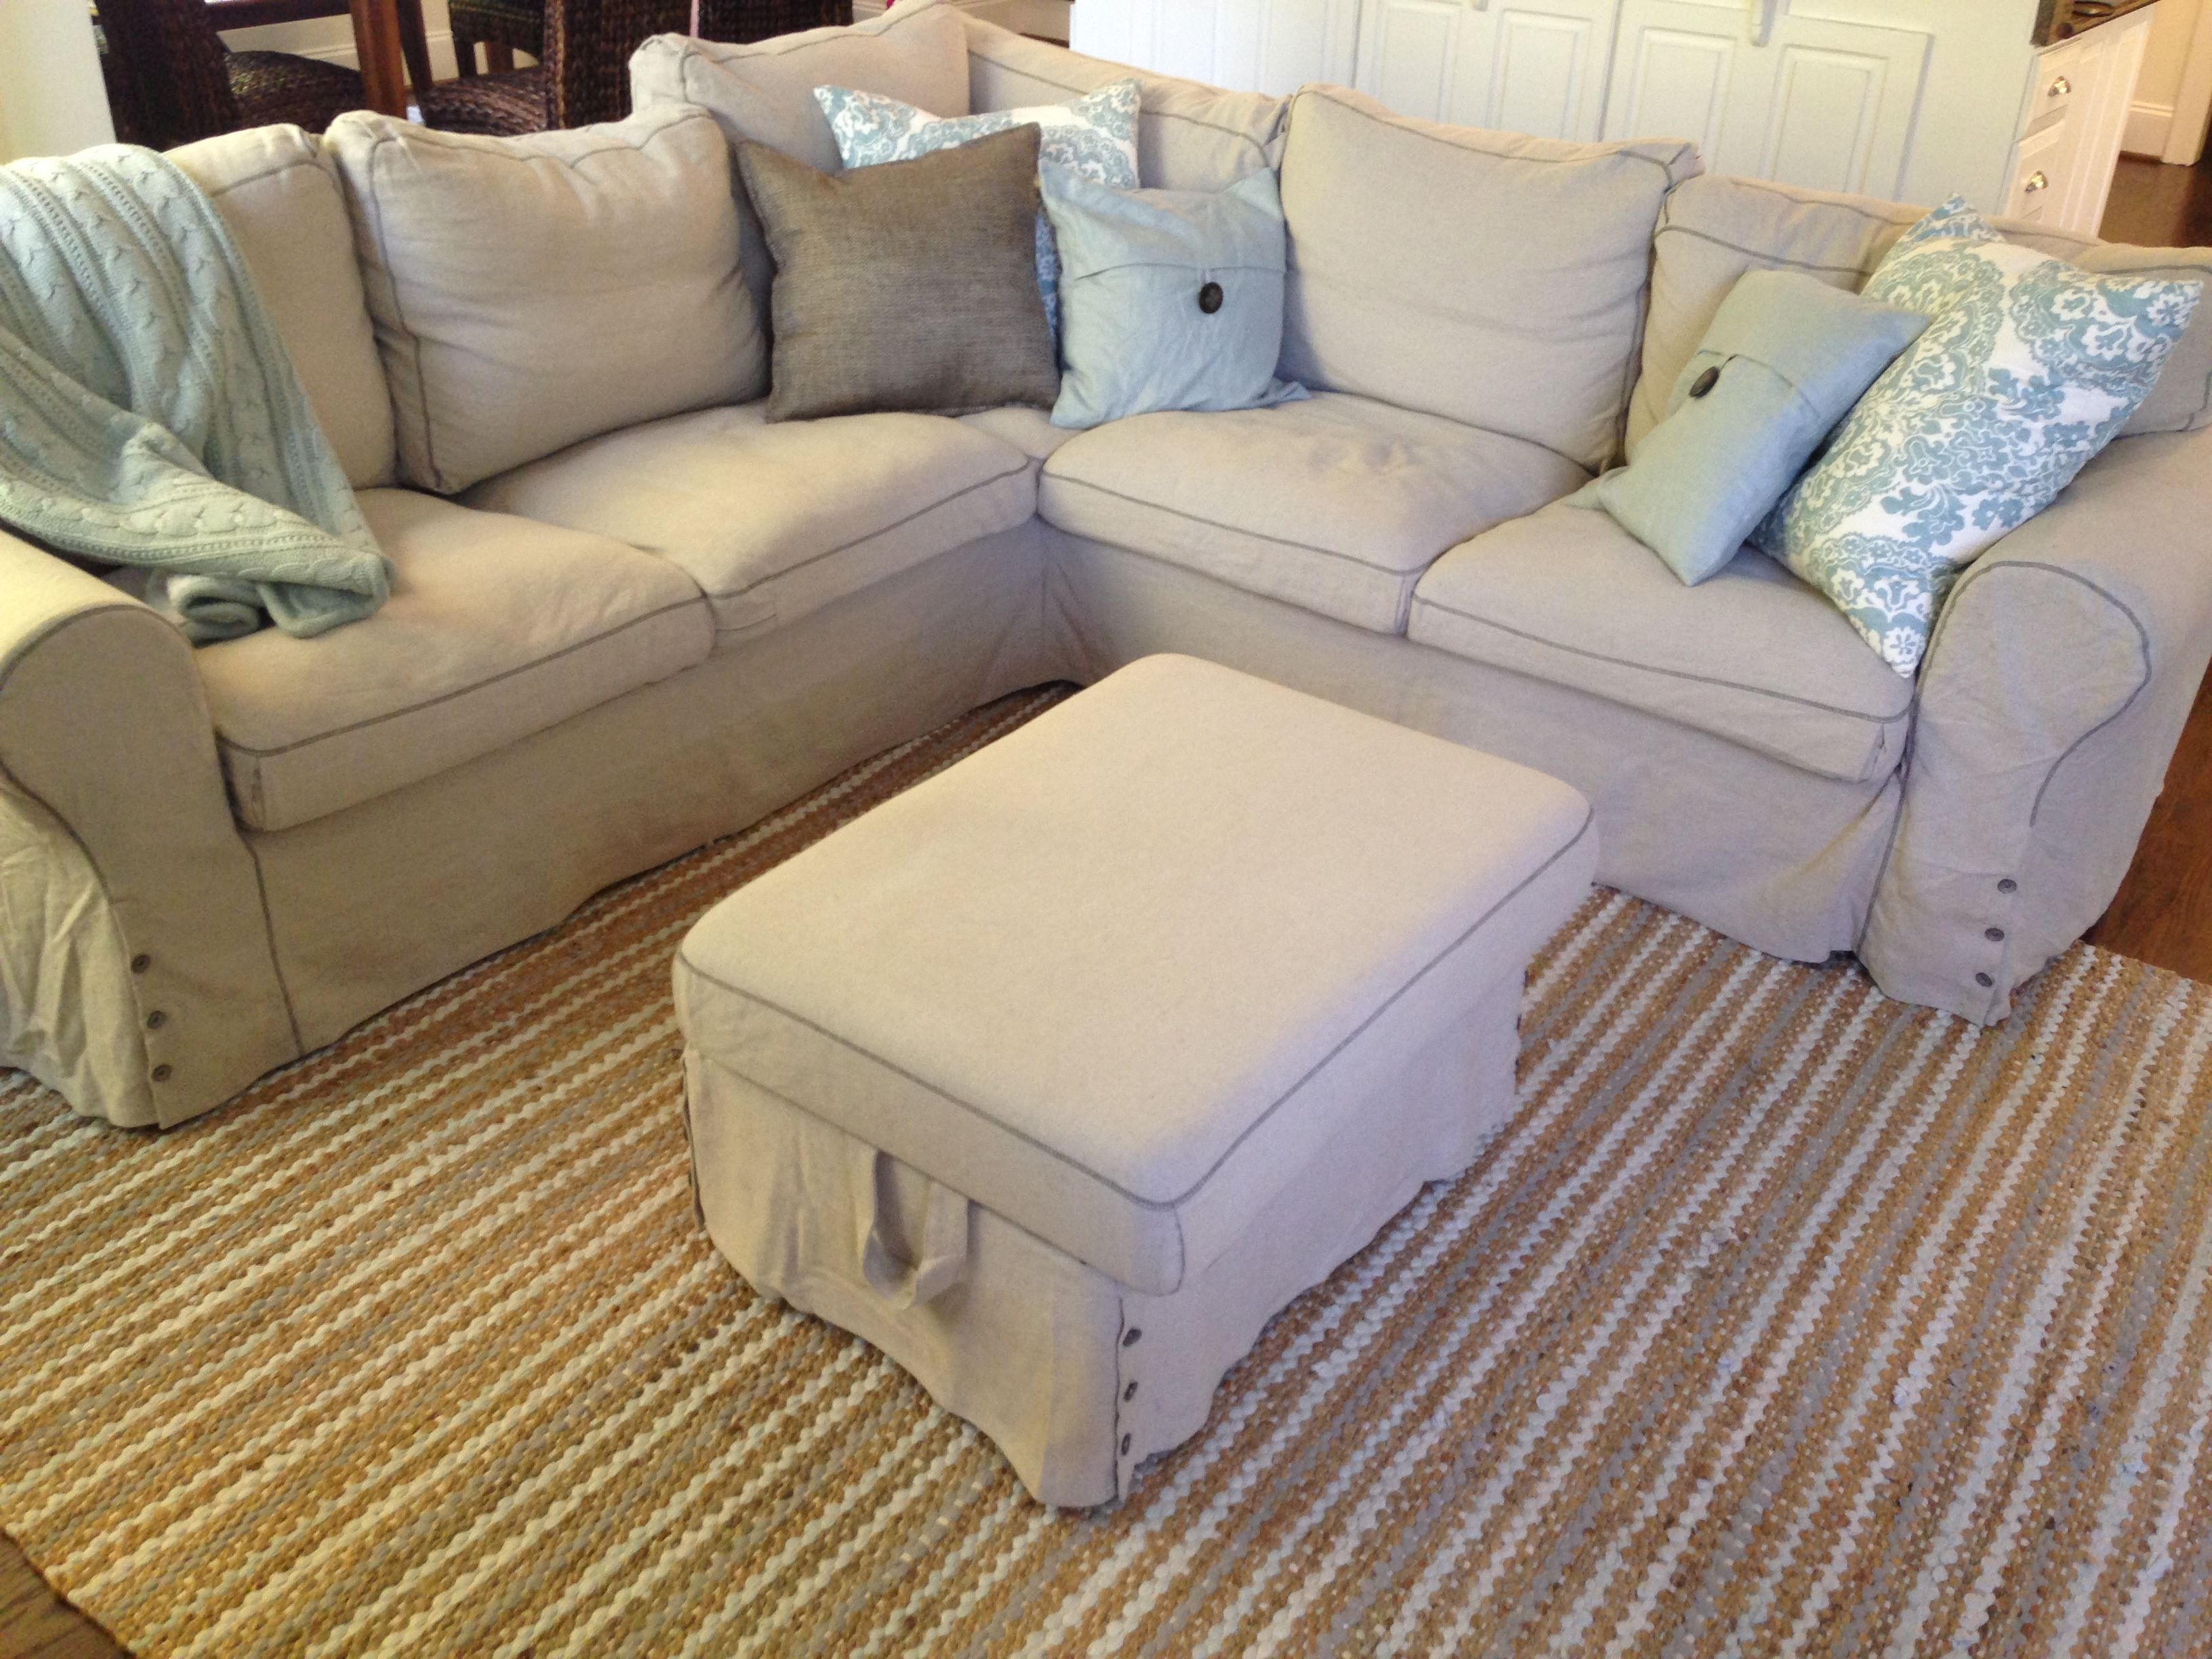 17 Best Images About My New Sofa On Pinterest With Washable Sofas (View 7 of 15)